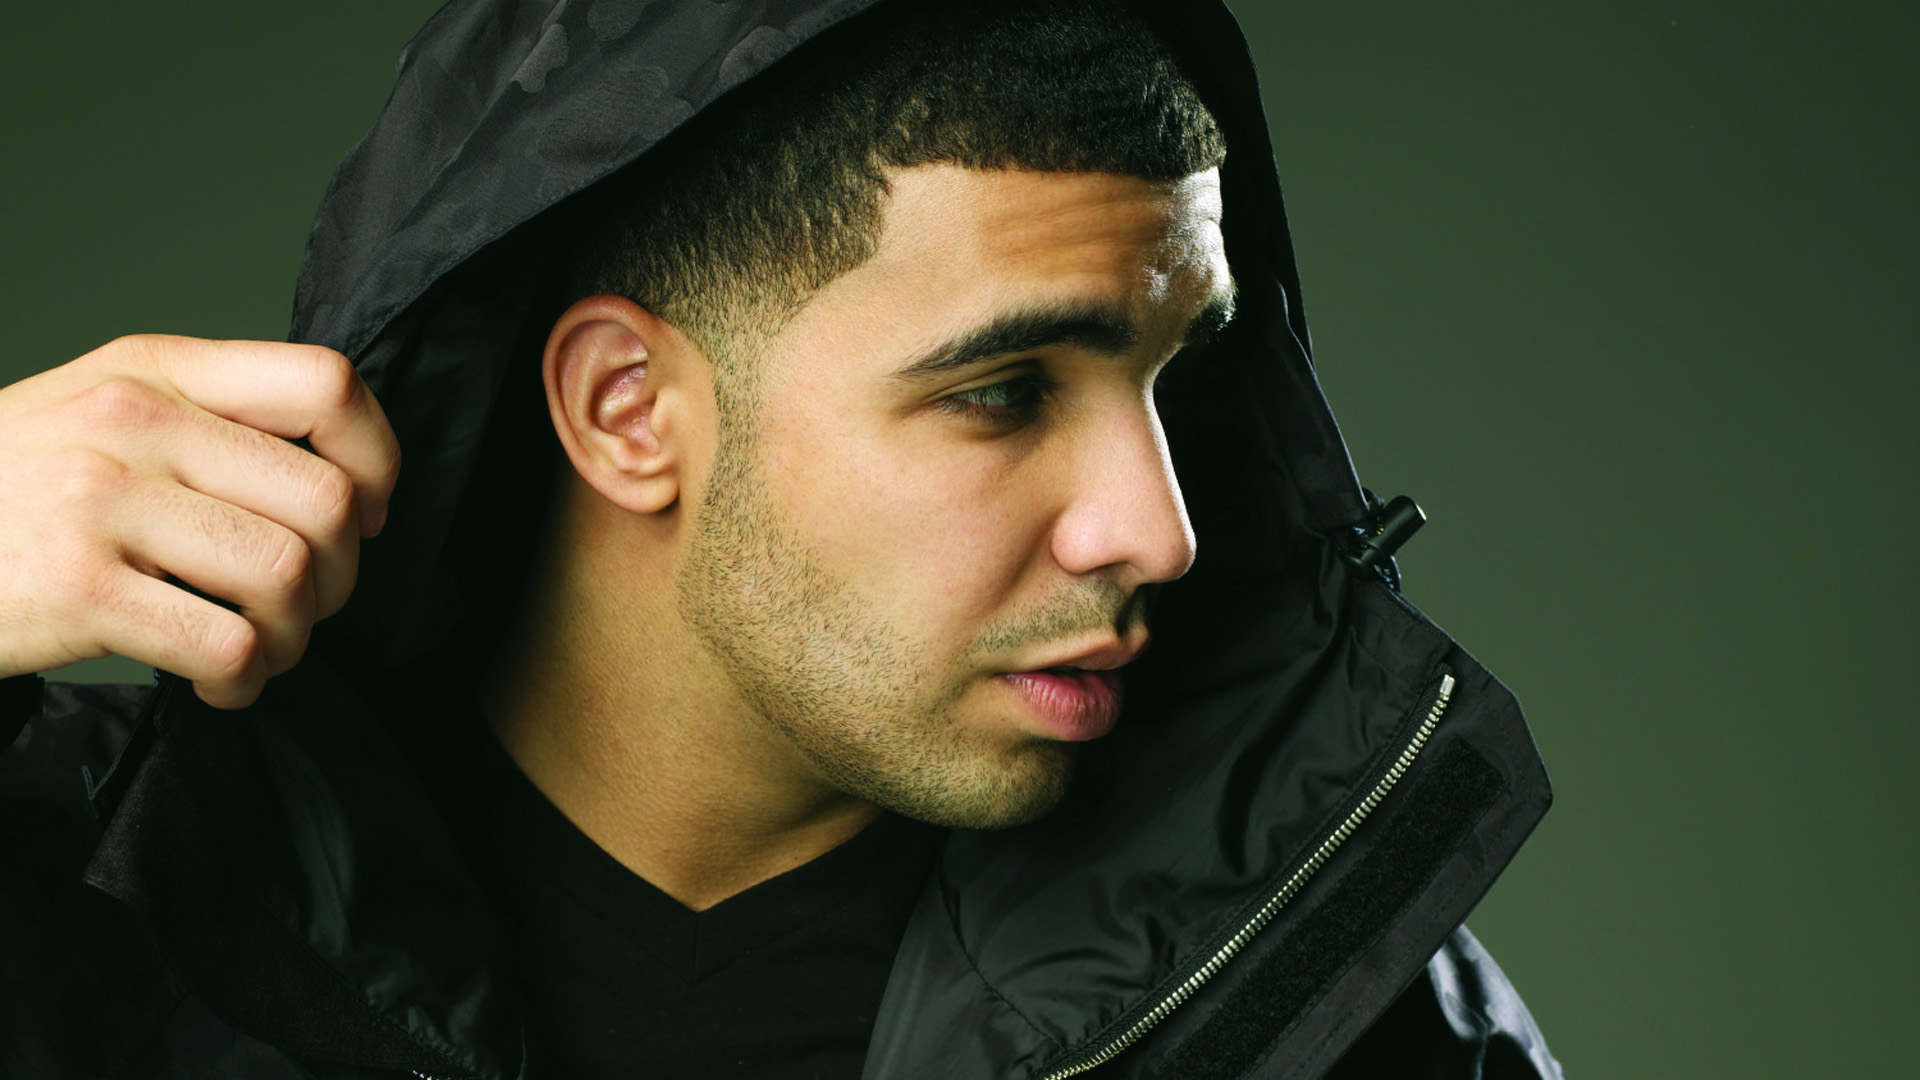 Famed hip-hop artist Drake was born to a mixed-race couple in Canada in 1986, and raised Jewish. He came to fame playing wheelchair-bound Jimmy Brooks in ...